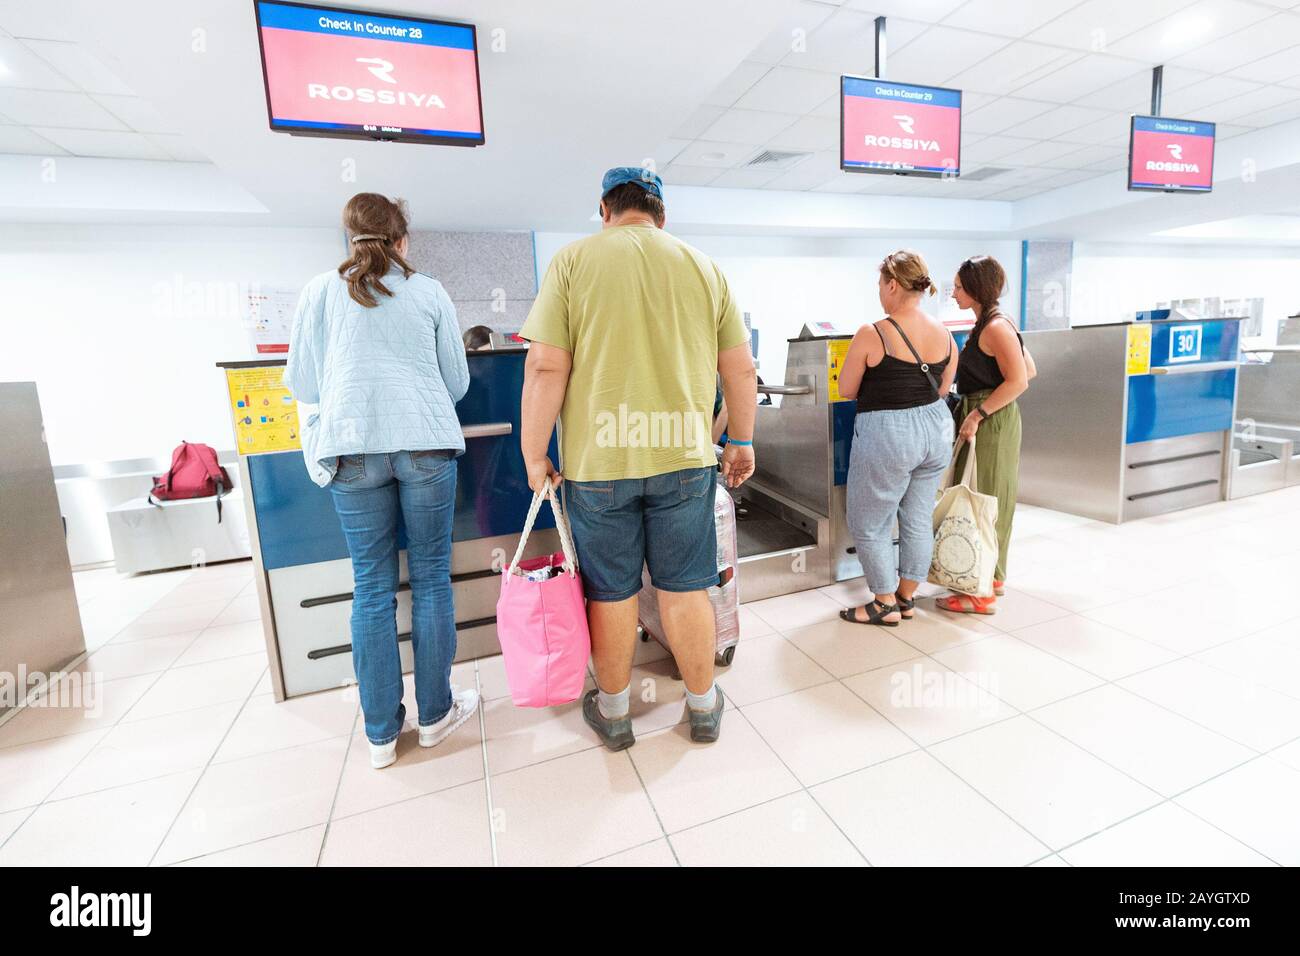 31 May 2019, Rhodes, Greece: Airport Check-In Desk with crowds of people in line Stock Photo